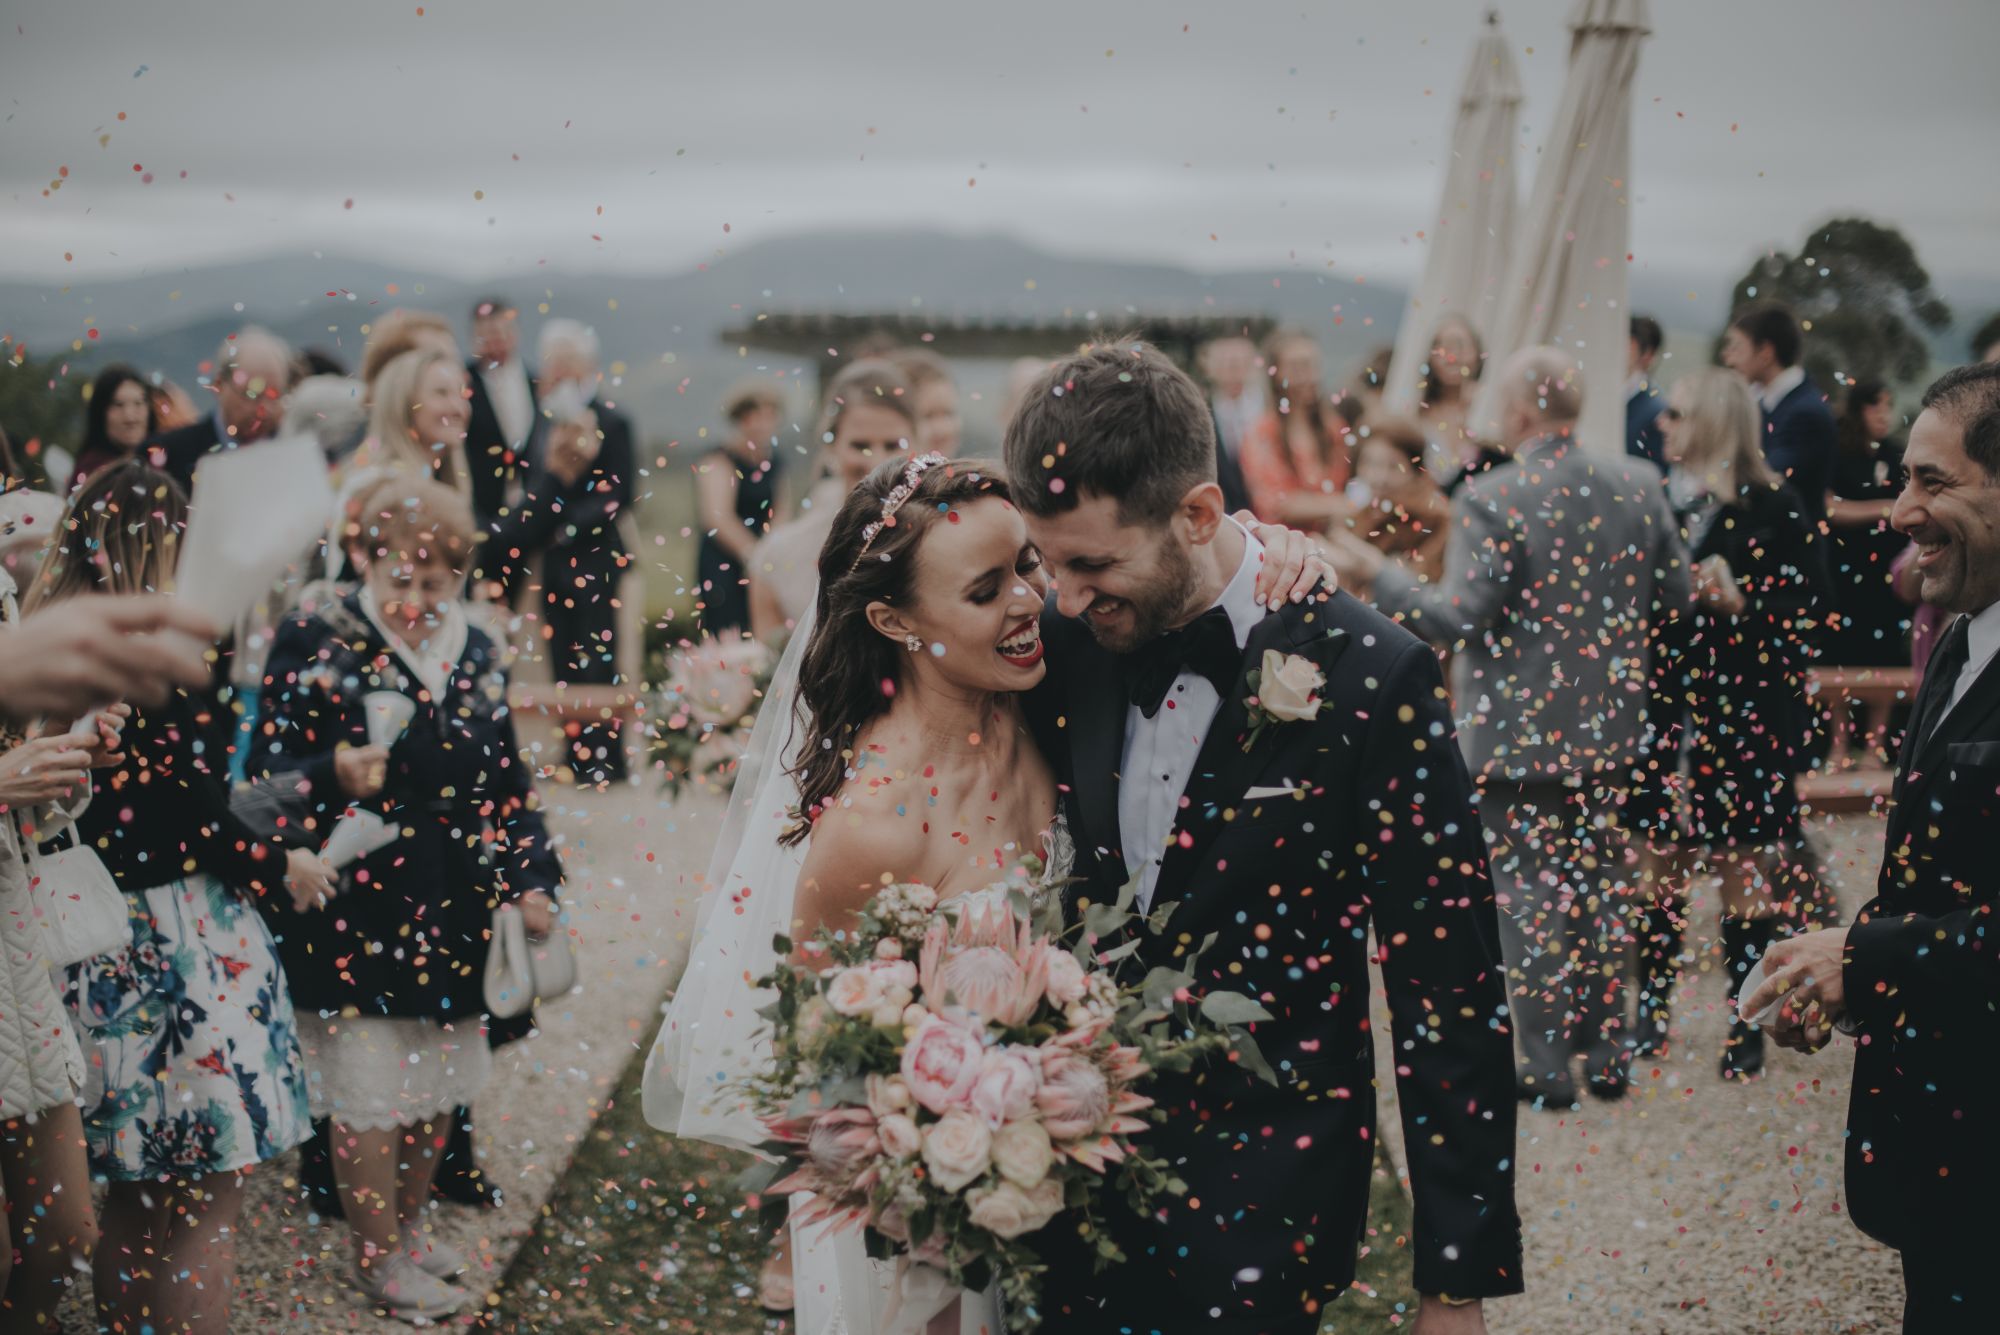 Newlywed couple walking down aisle with confetti being thrown by guests.